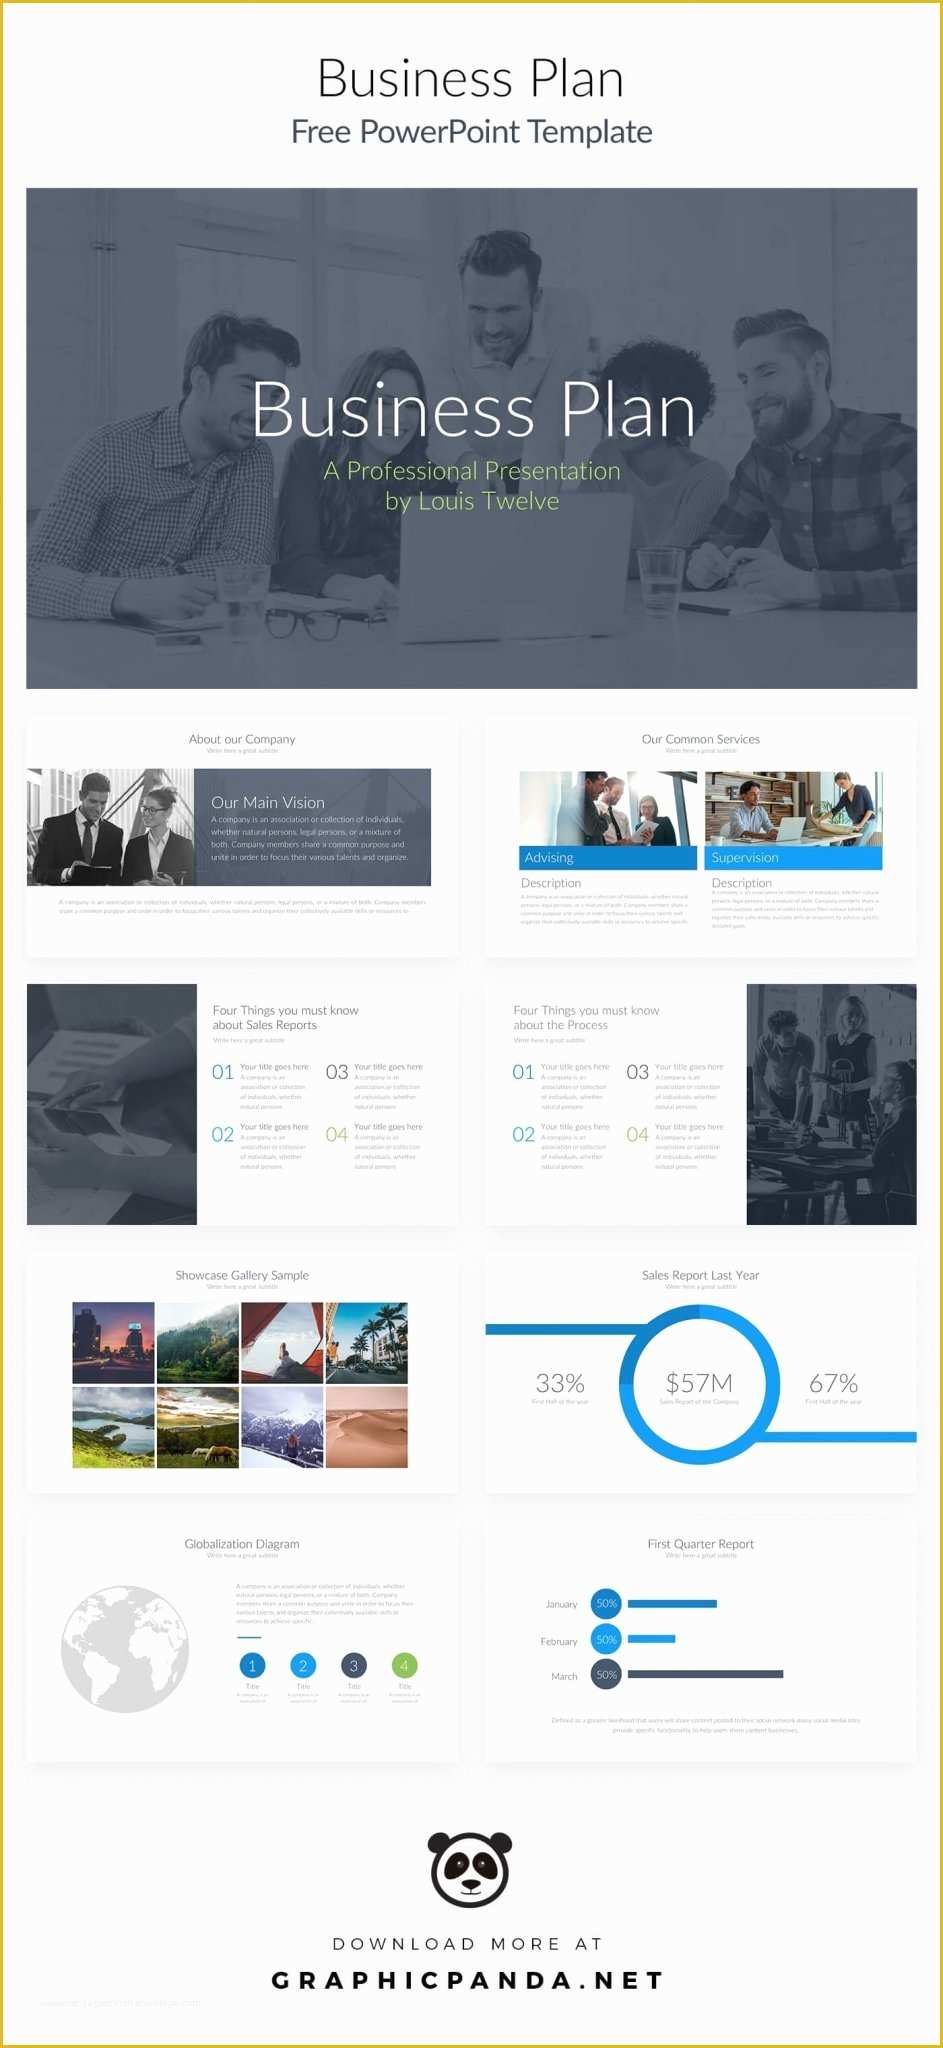 Business Proposal Powerpoint Template Free Download Of Free Business Plan Powerpoint Presentation Template